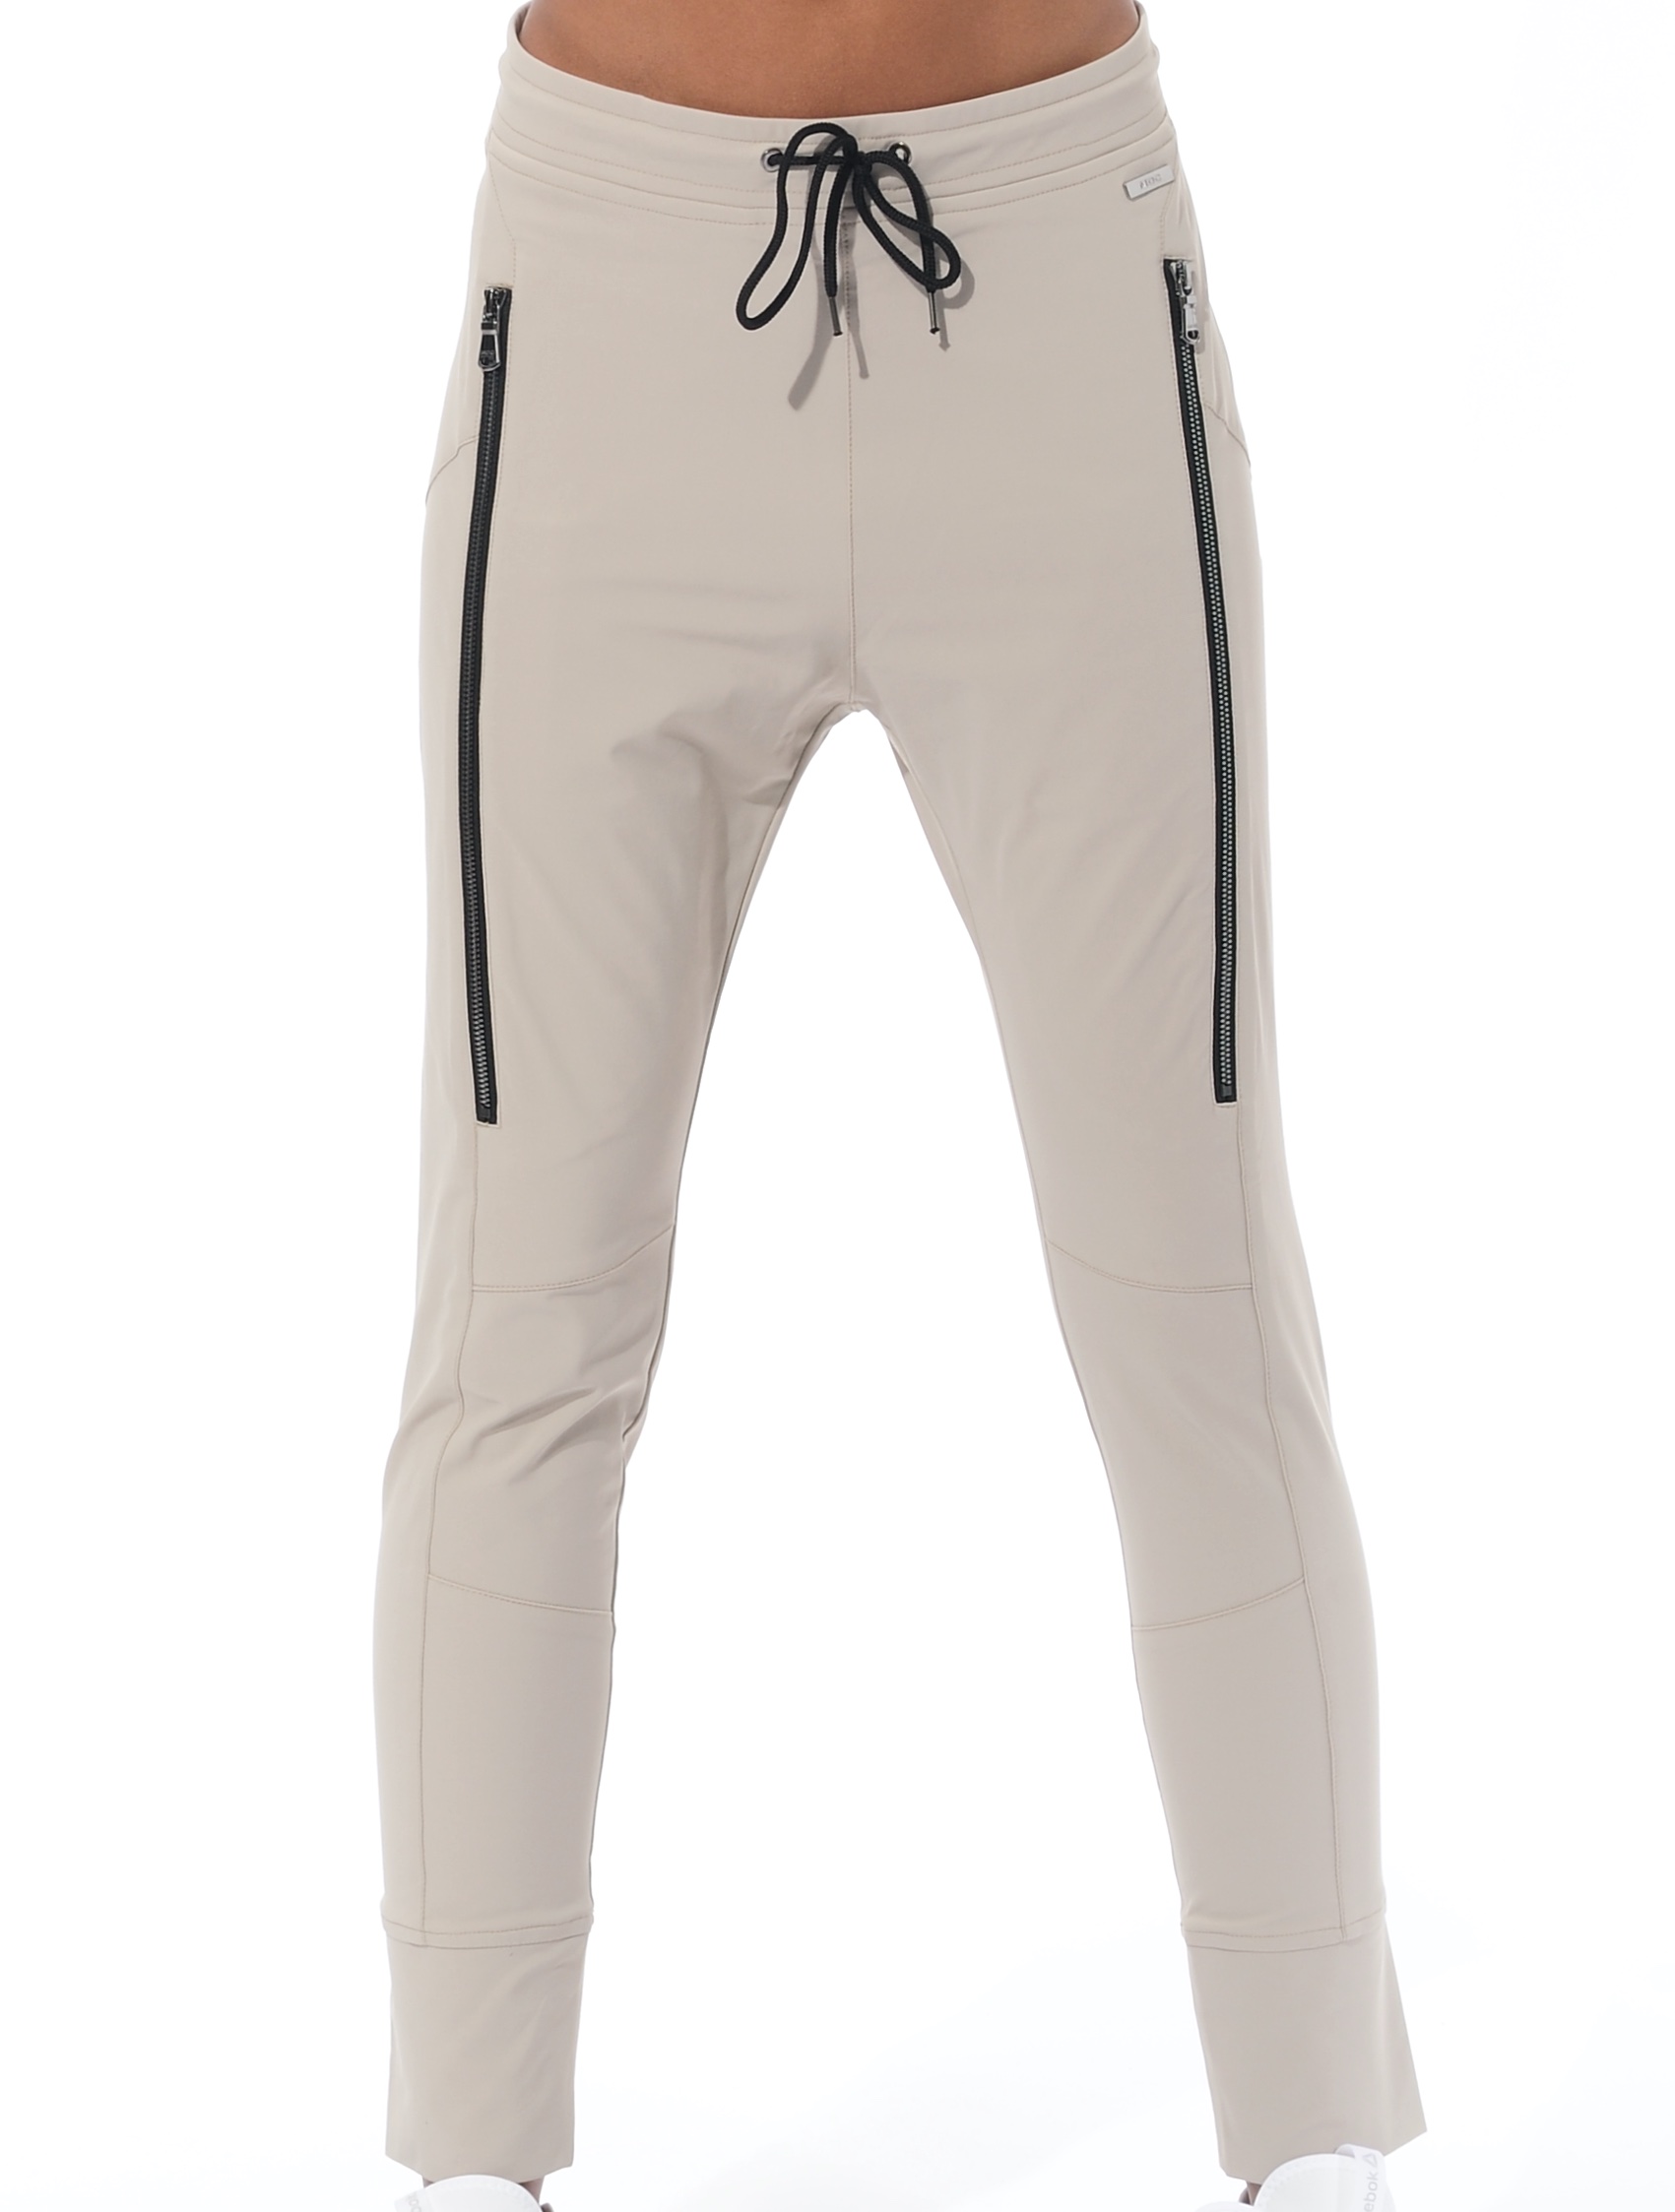 4way stretch jag pants light taupe 